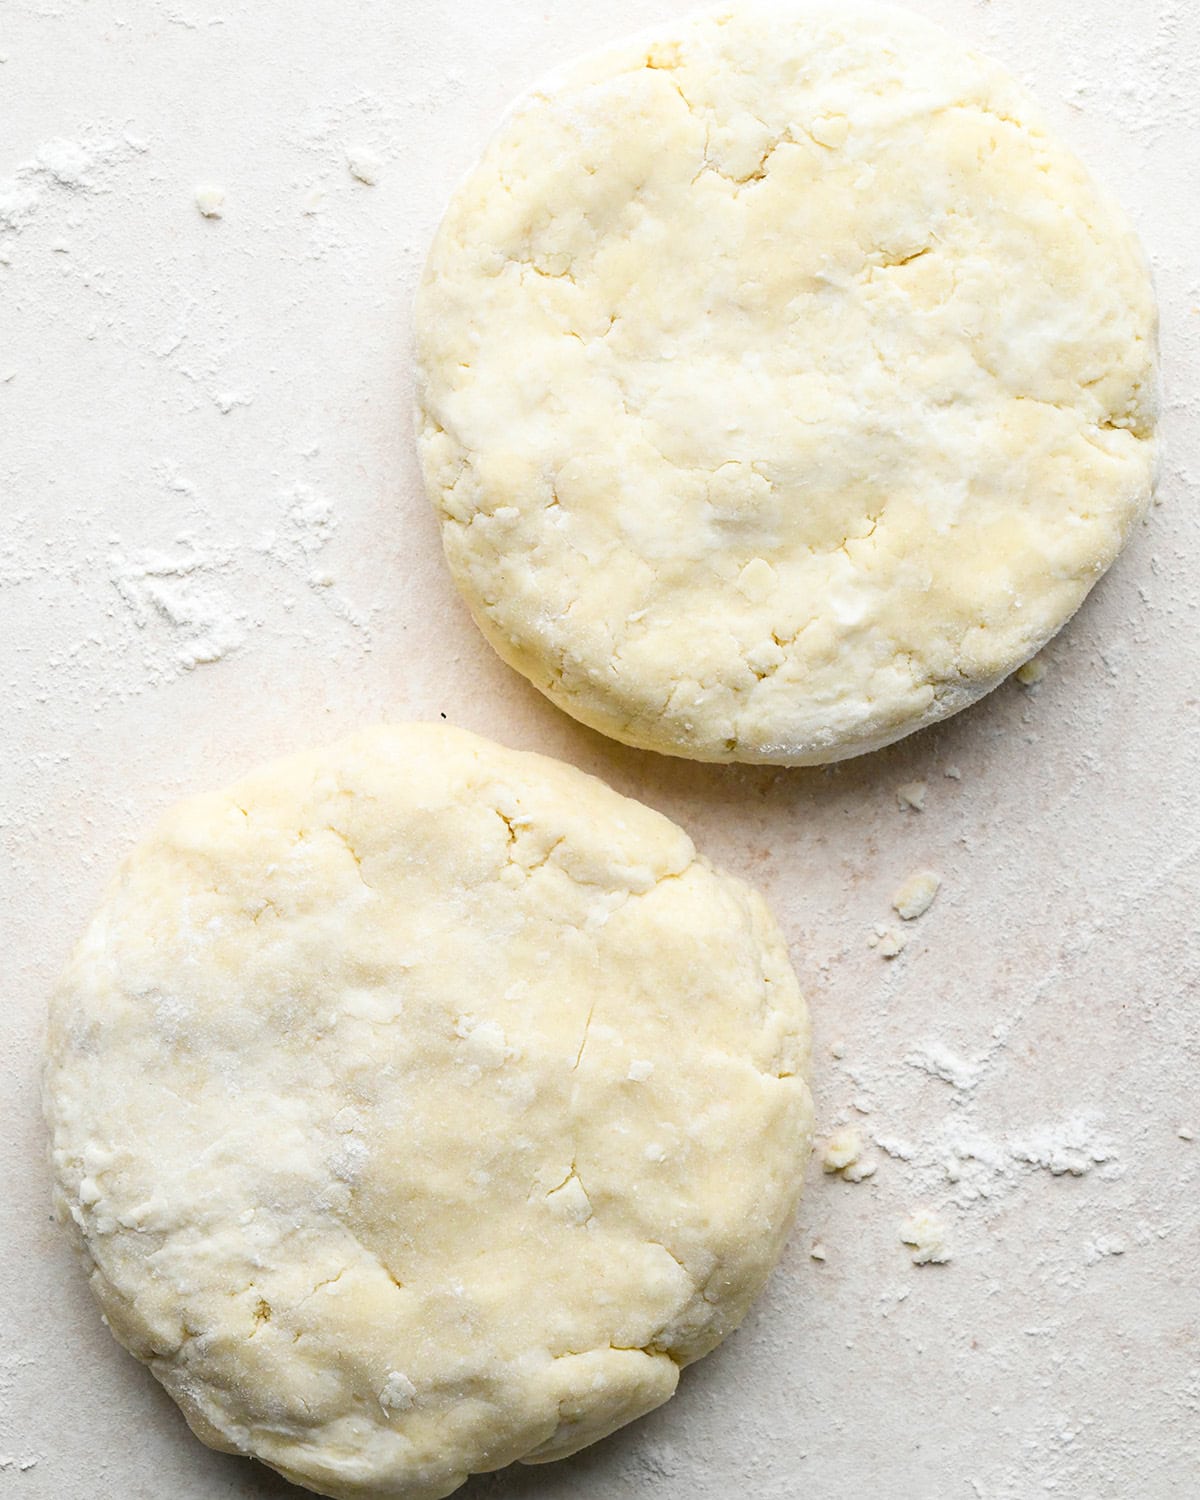 quiche crust dough formed into two round discs